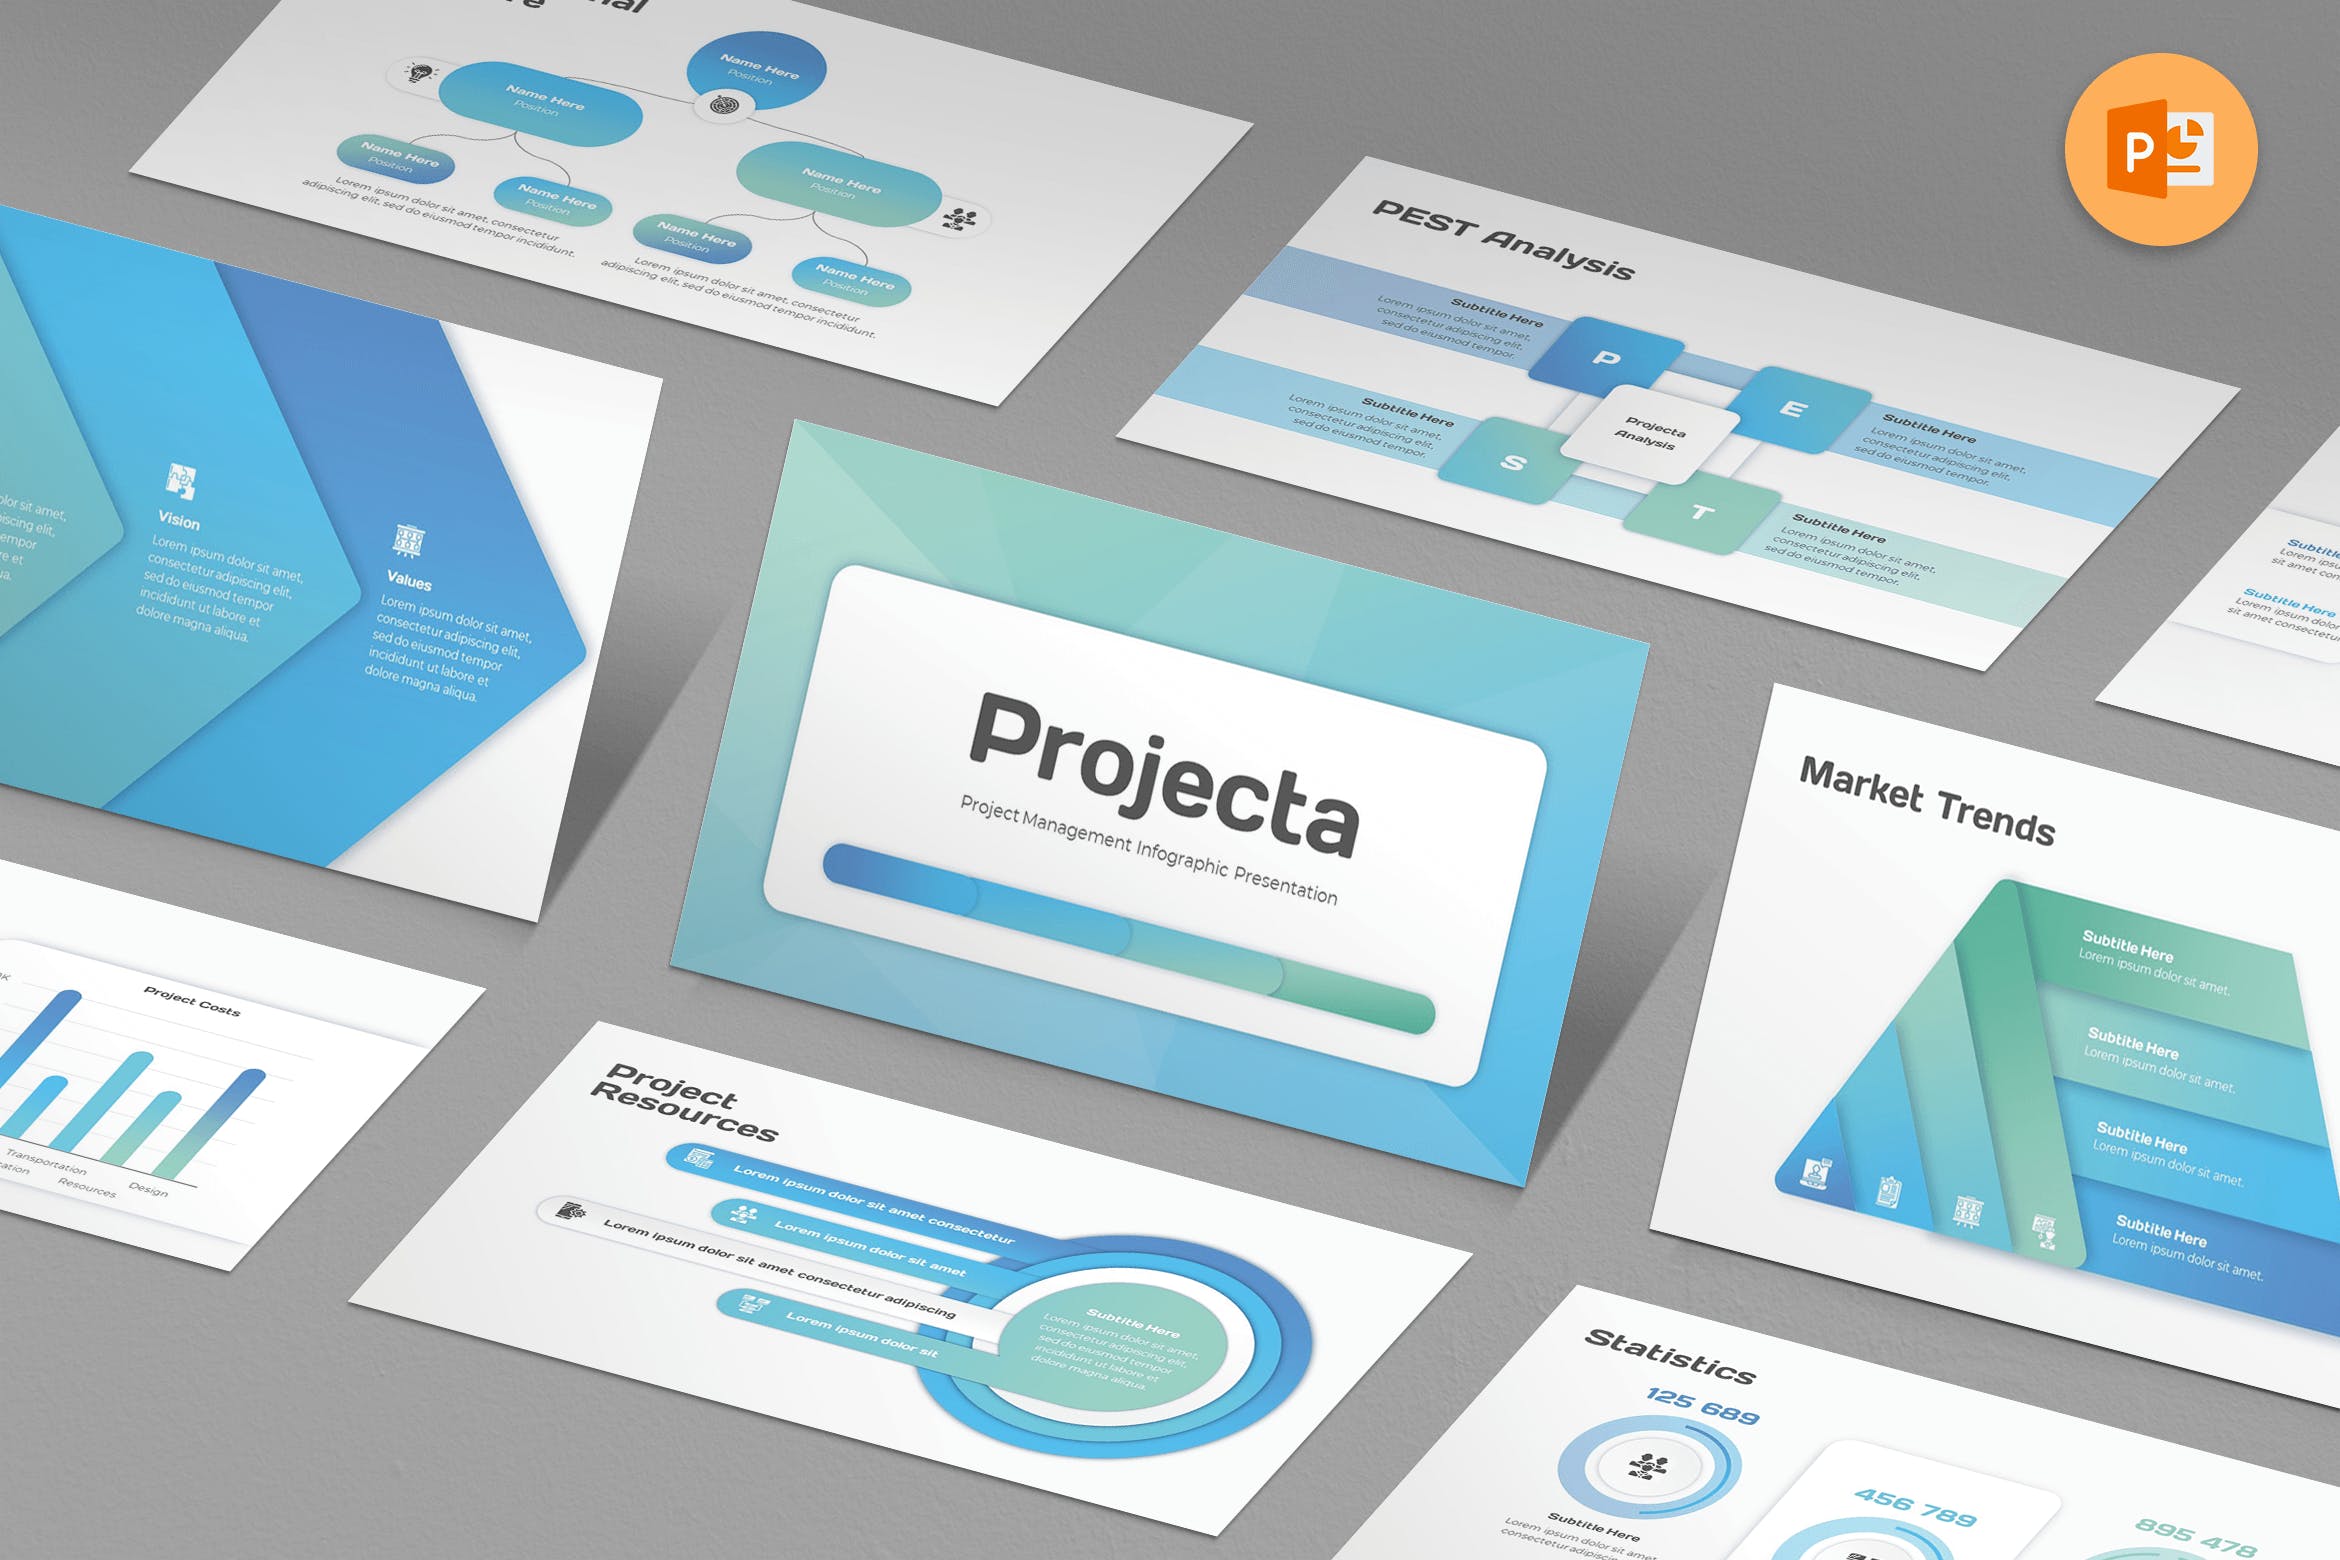 Cover image of Project Management PowerPoint Presentation.